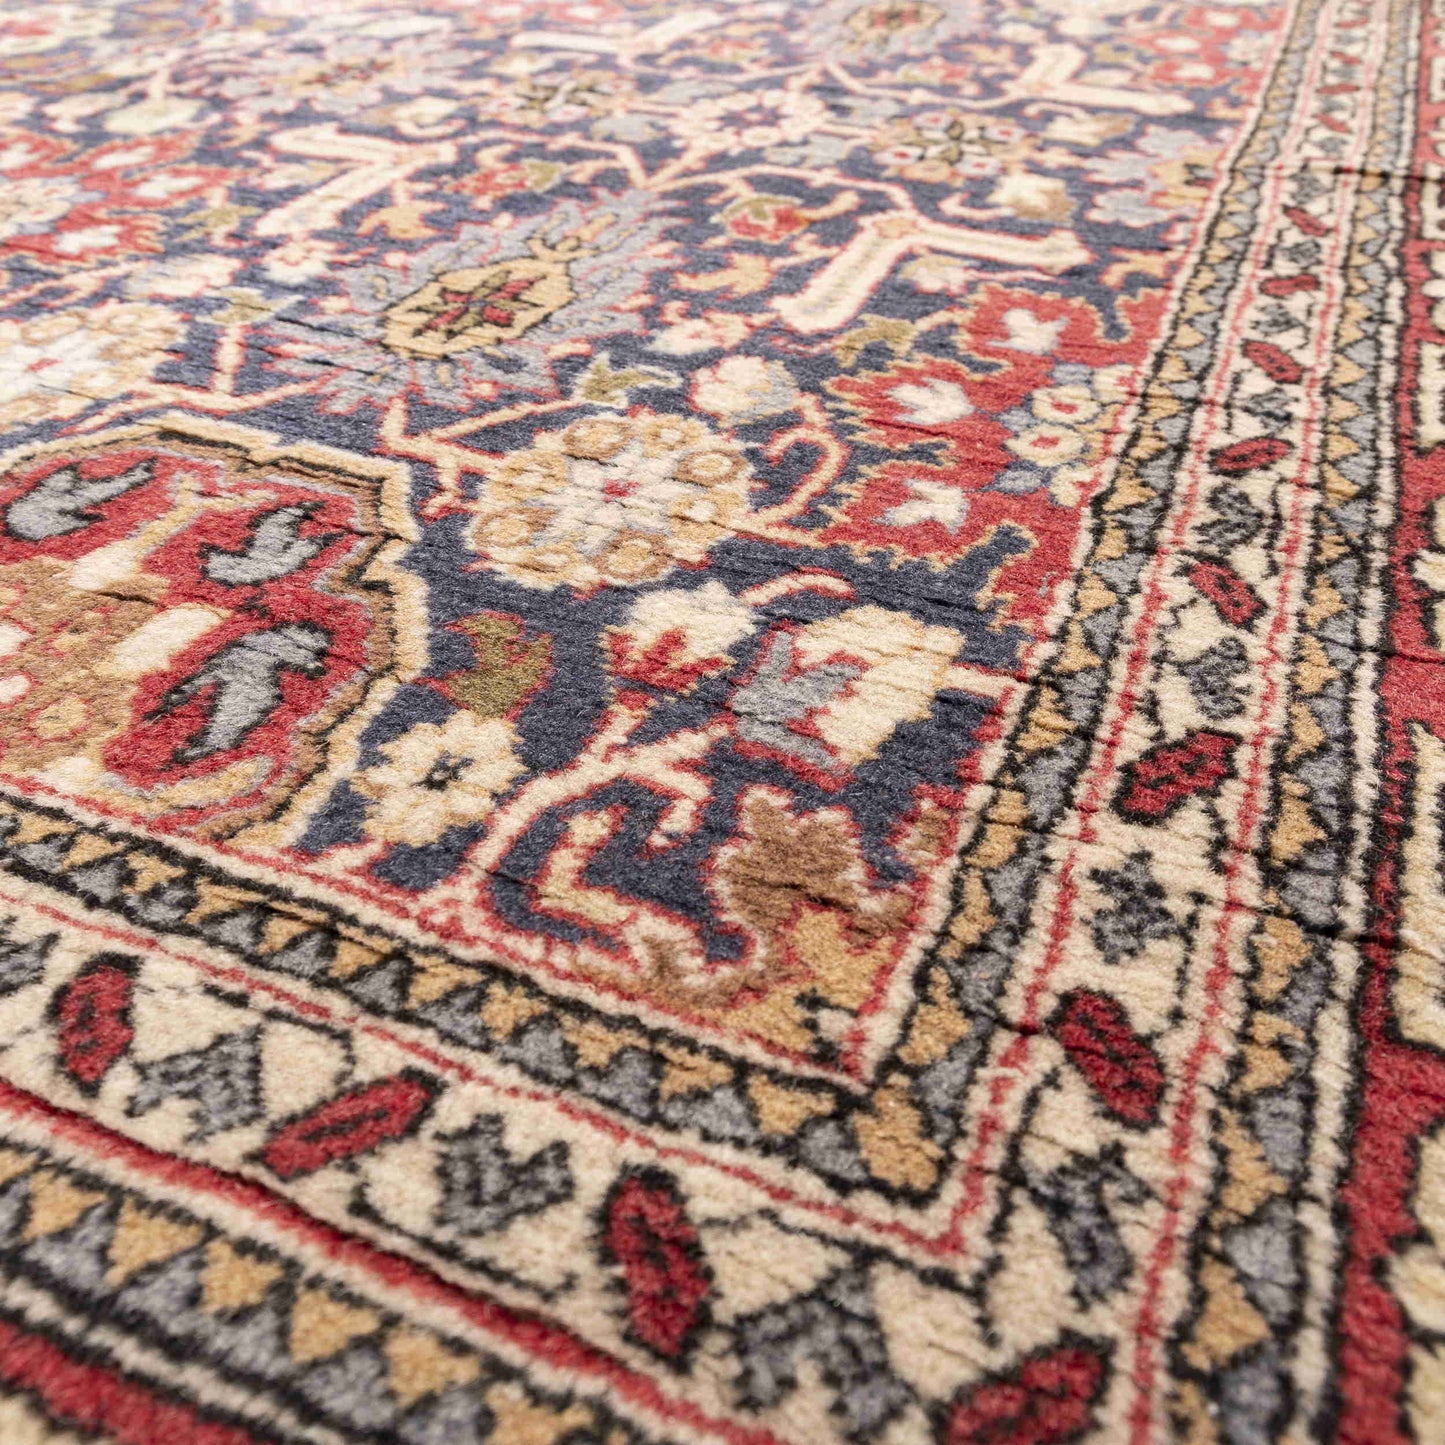 Oriental Rug Hereke Hand Knotted Wool On Cotton 164 X 266 Cm - 5' 5'' X 8' 9'' ER12